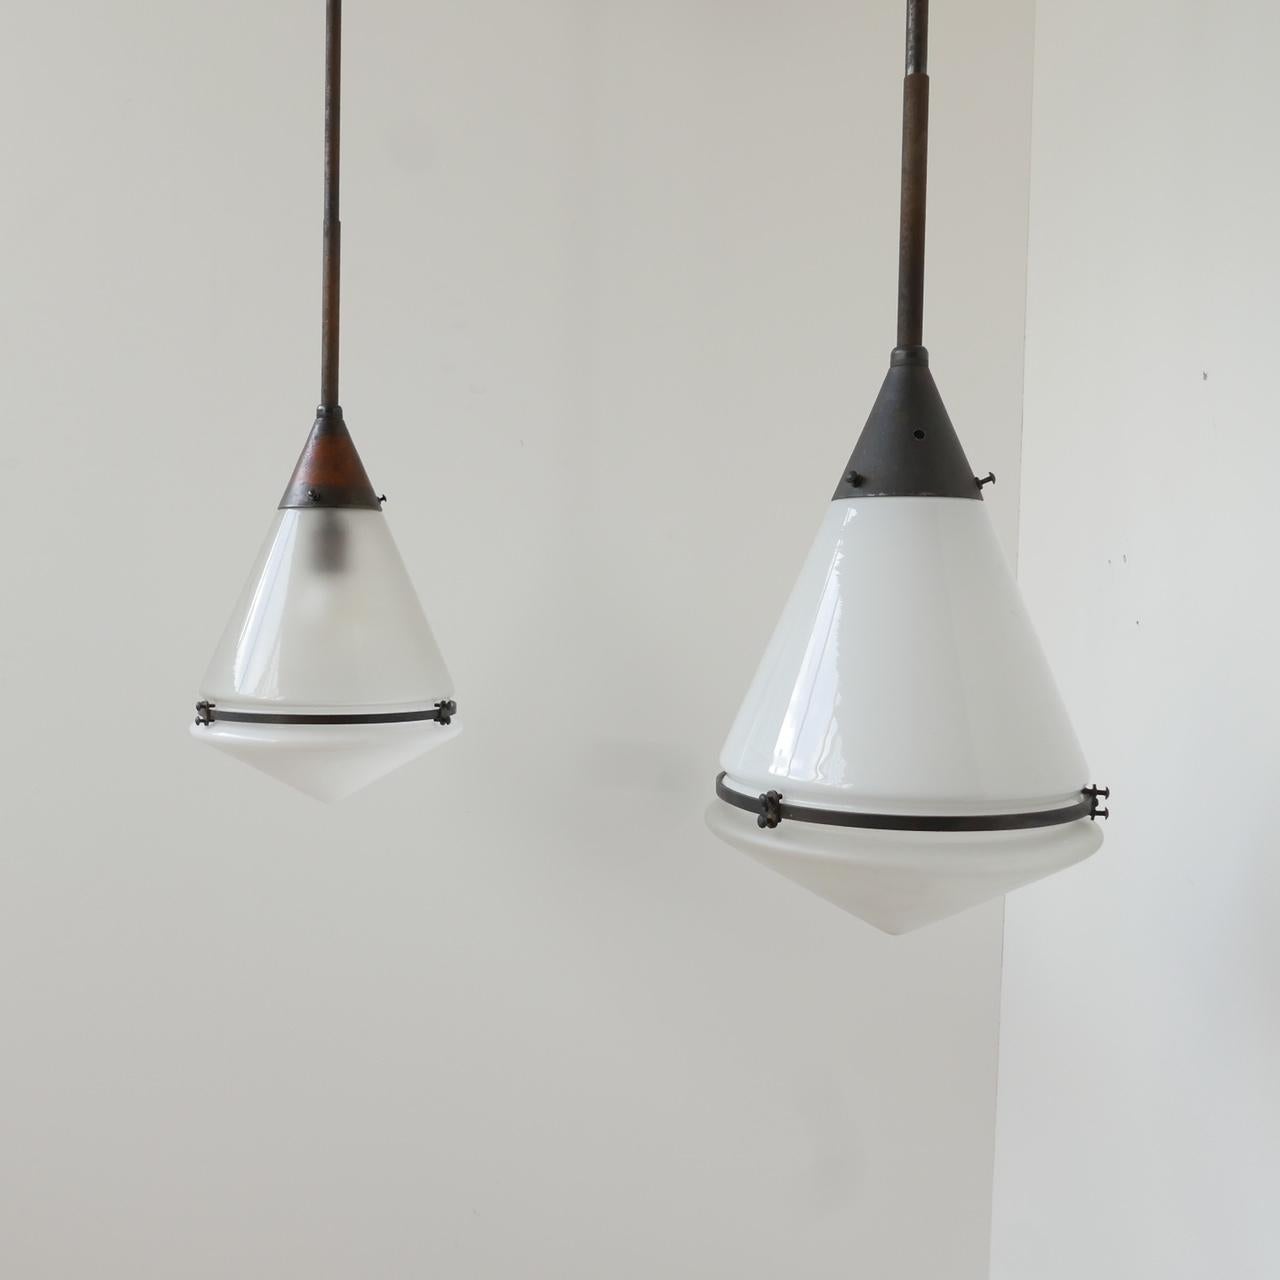 Peter Behrens Conical Pendants '4' In Good Condition For Sale In London, GB